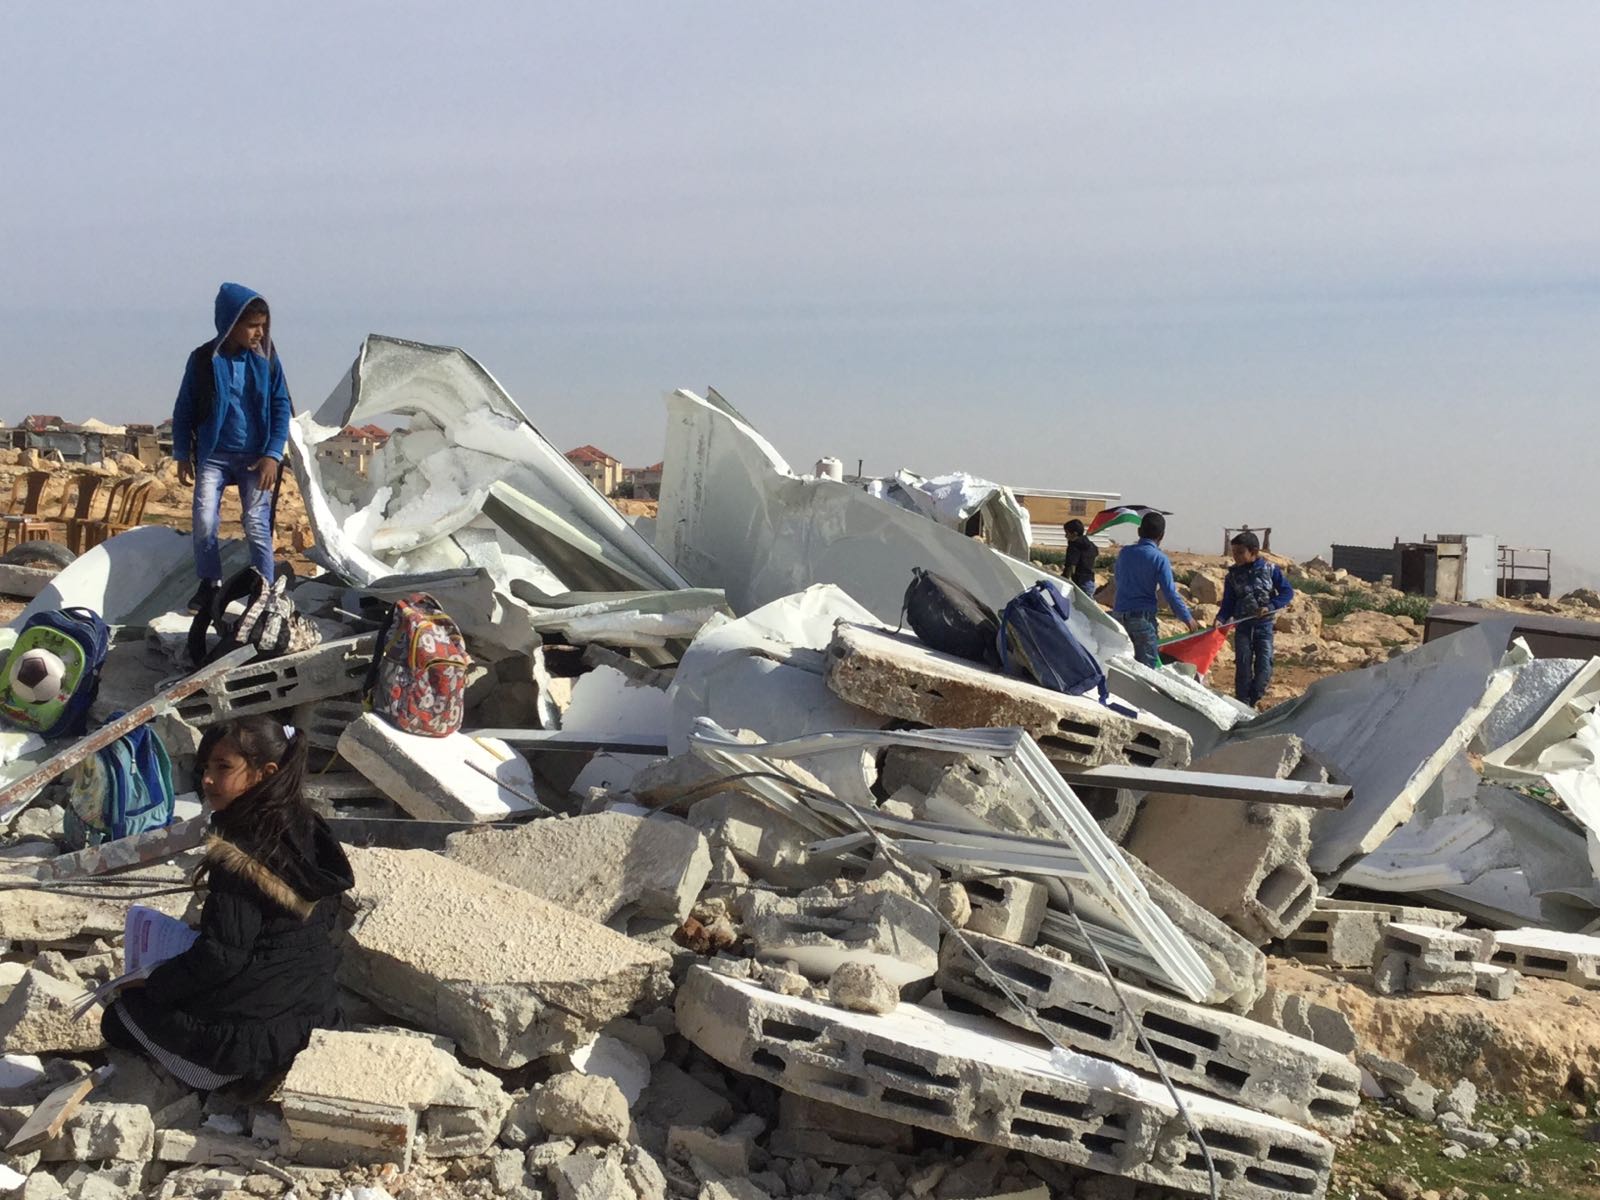 A school provided as a humanitarian assistance demolished on grounds of lack of permit in the Bedouin community of Abu Nuwar in Jerusalem. 4 Feb 2018. © Photo by OCHA